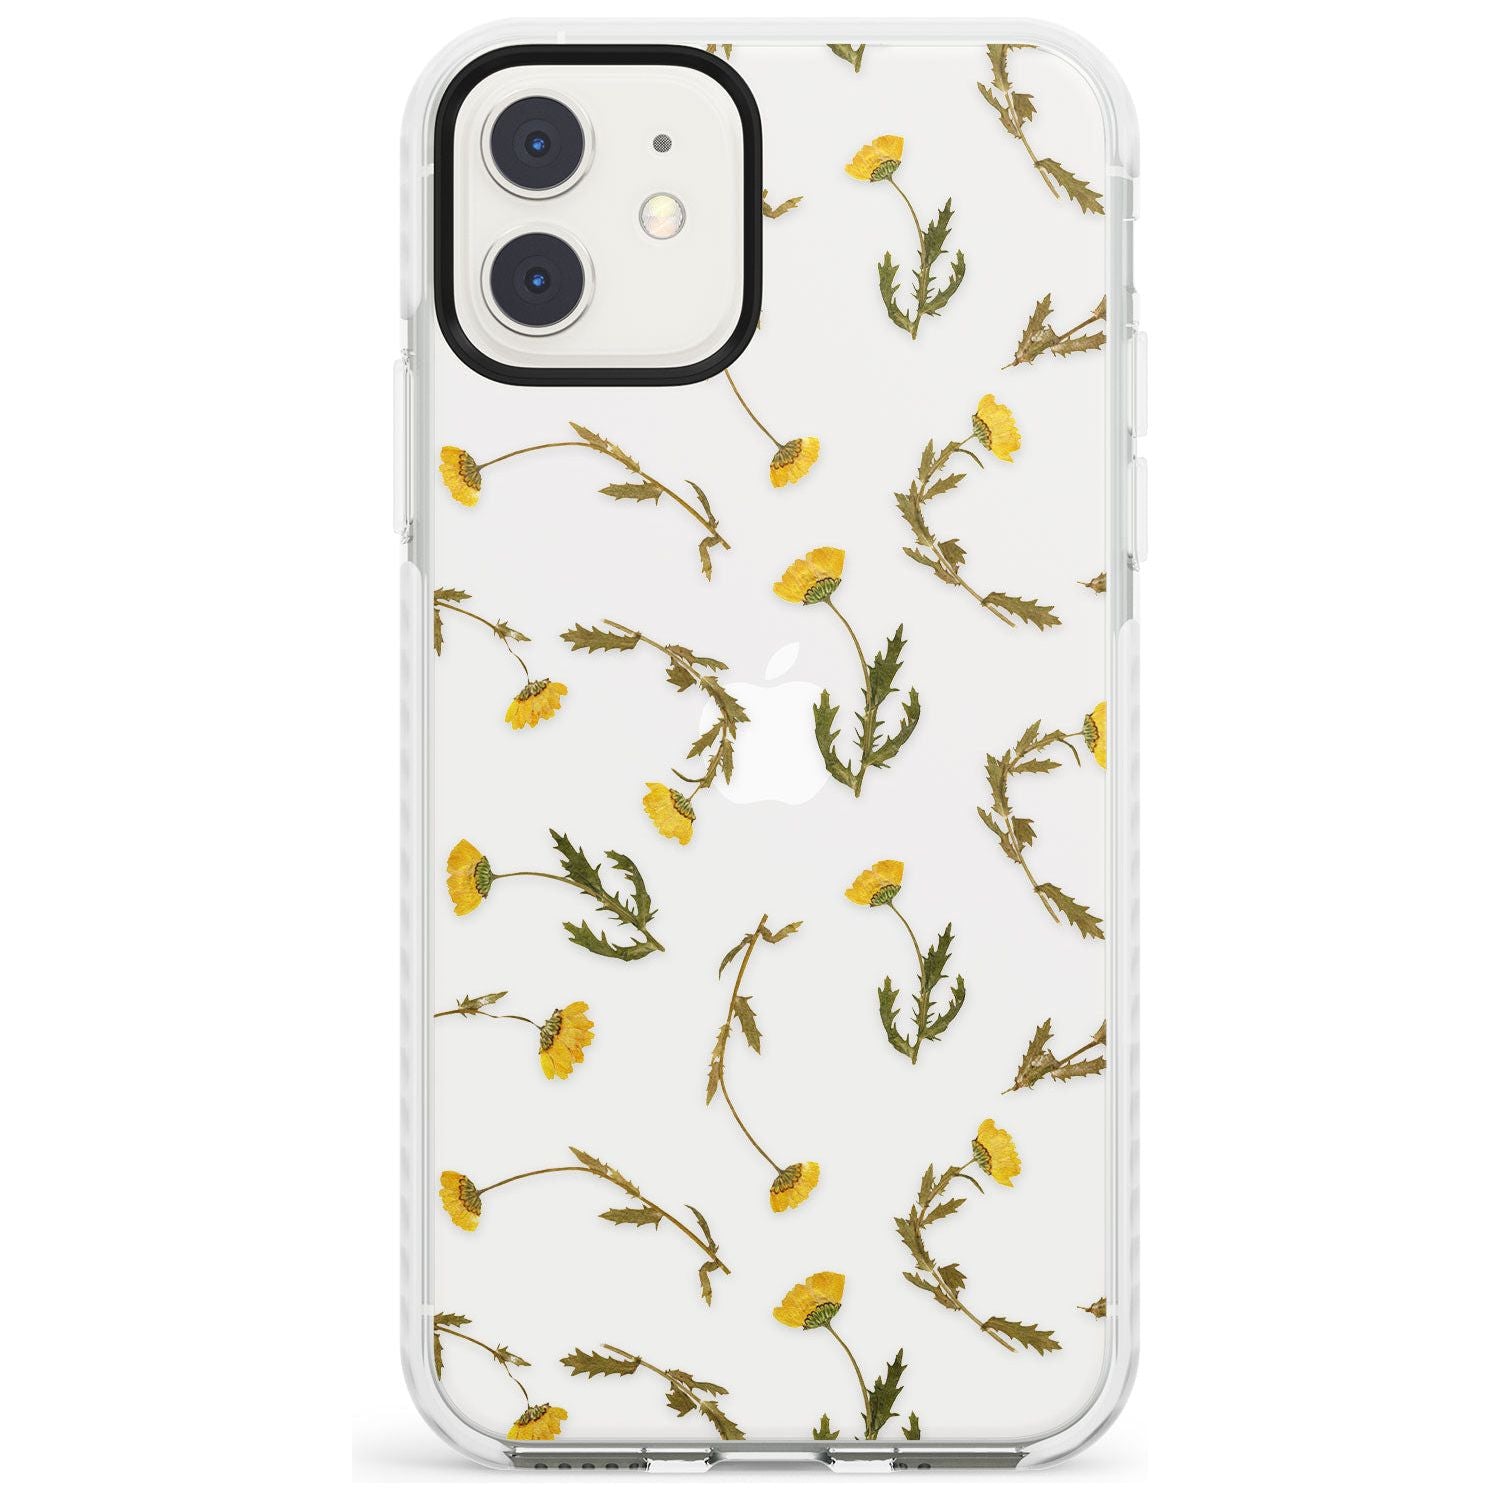 Long Stemmed Wildflowers - Dried Flower-Inspired Impact Phone Case for iPhone 11